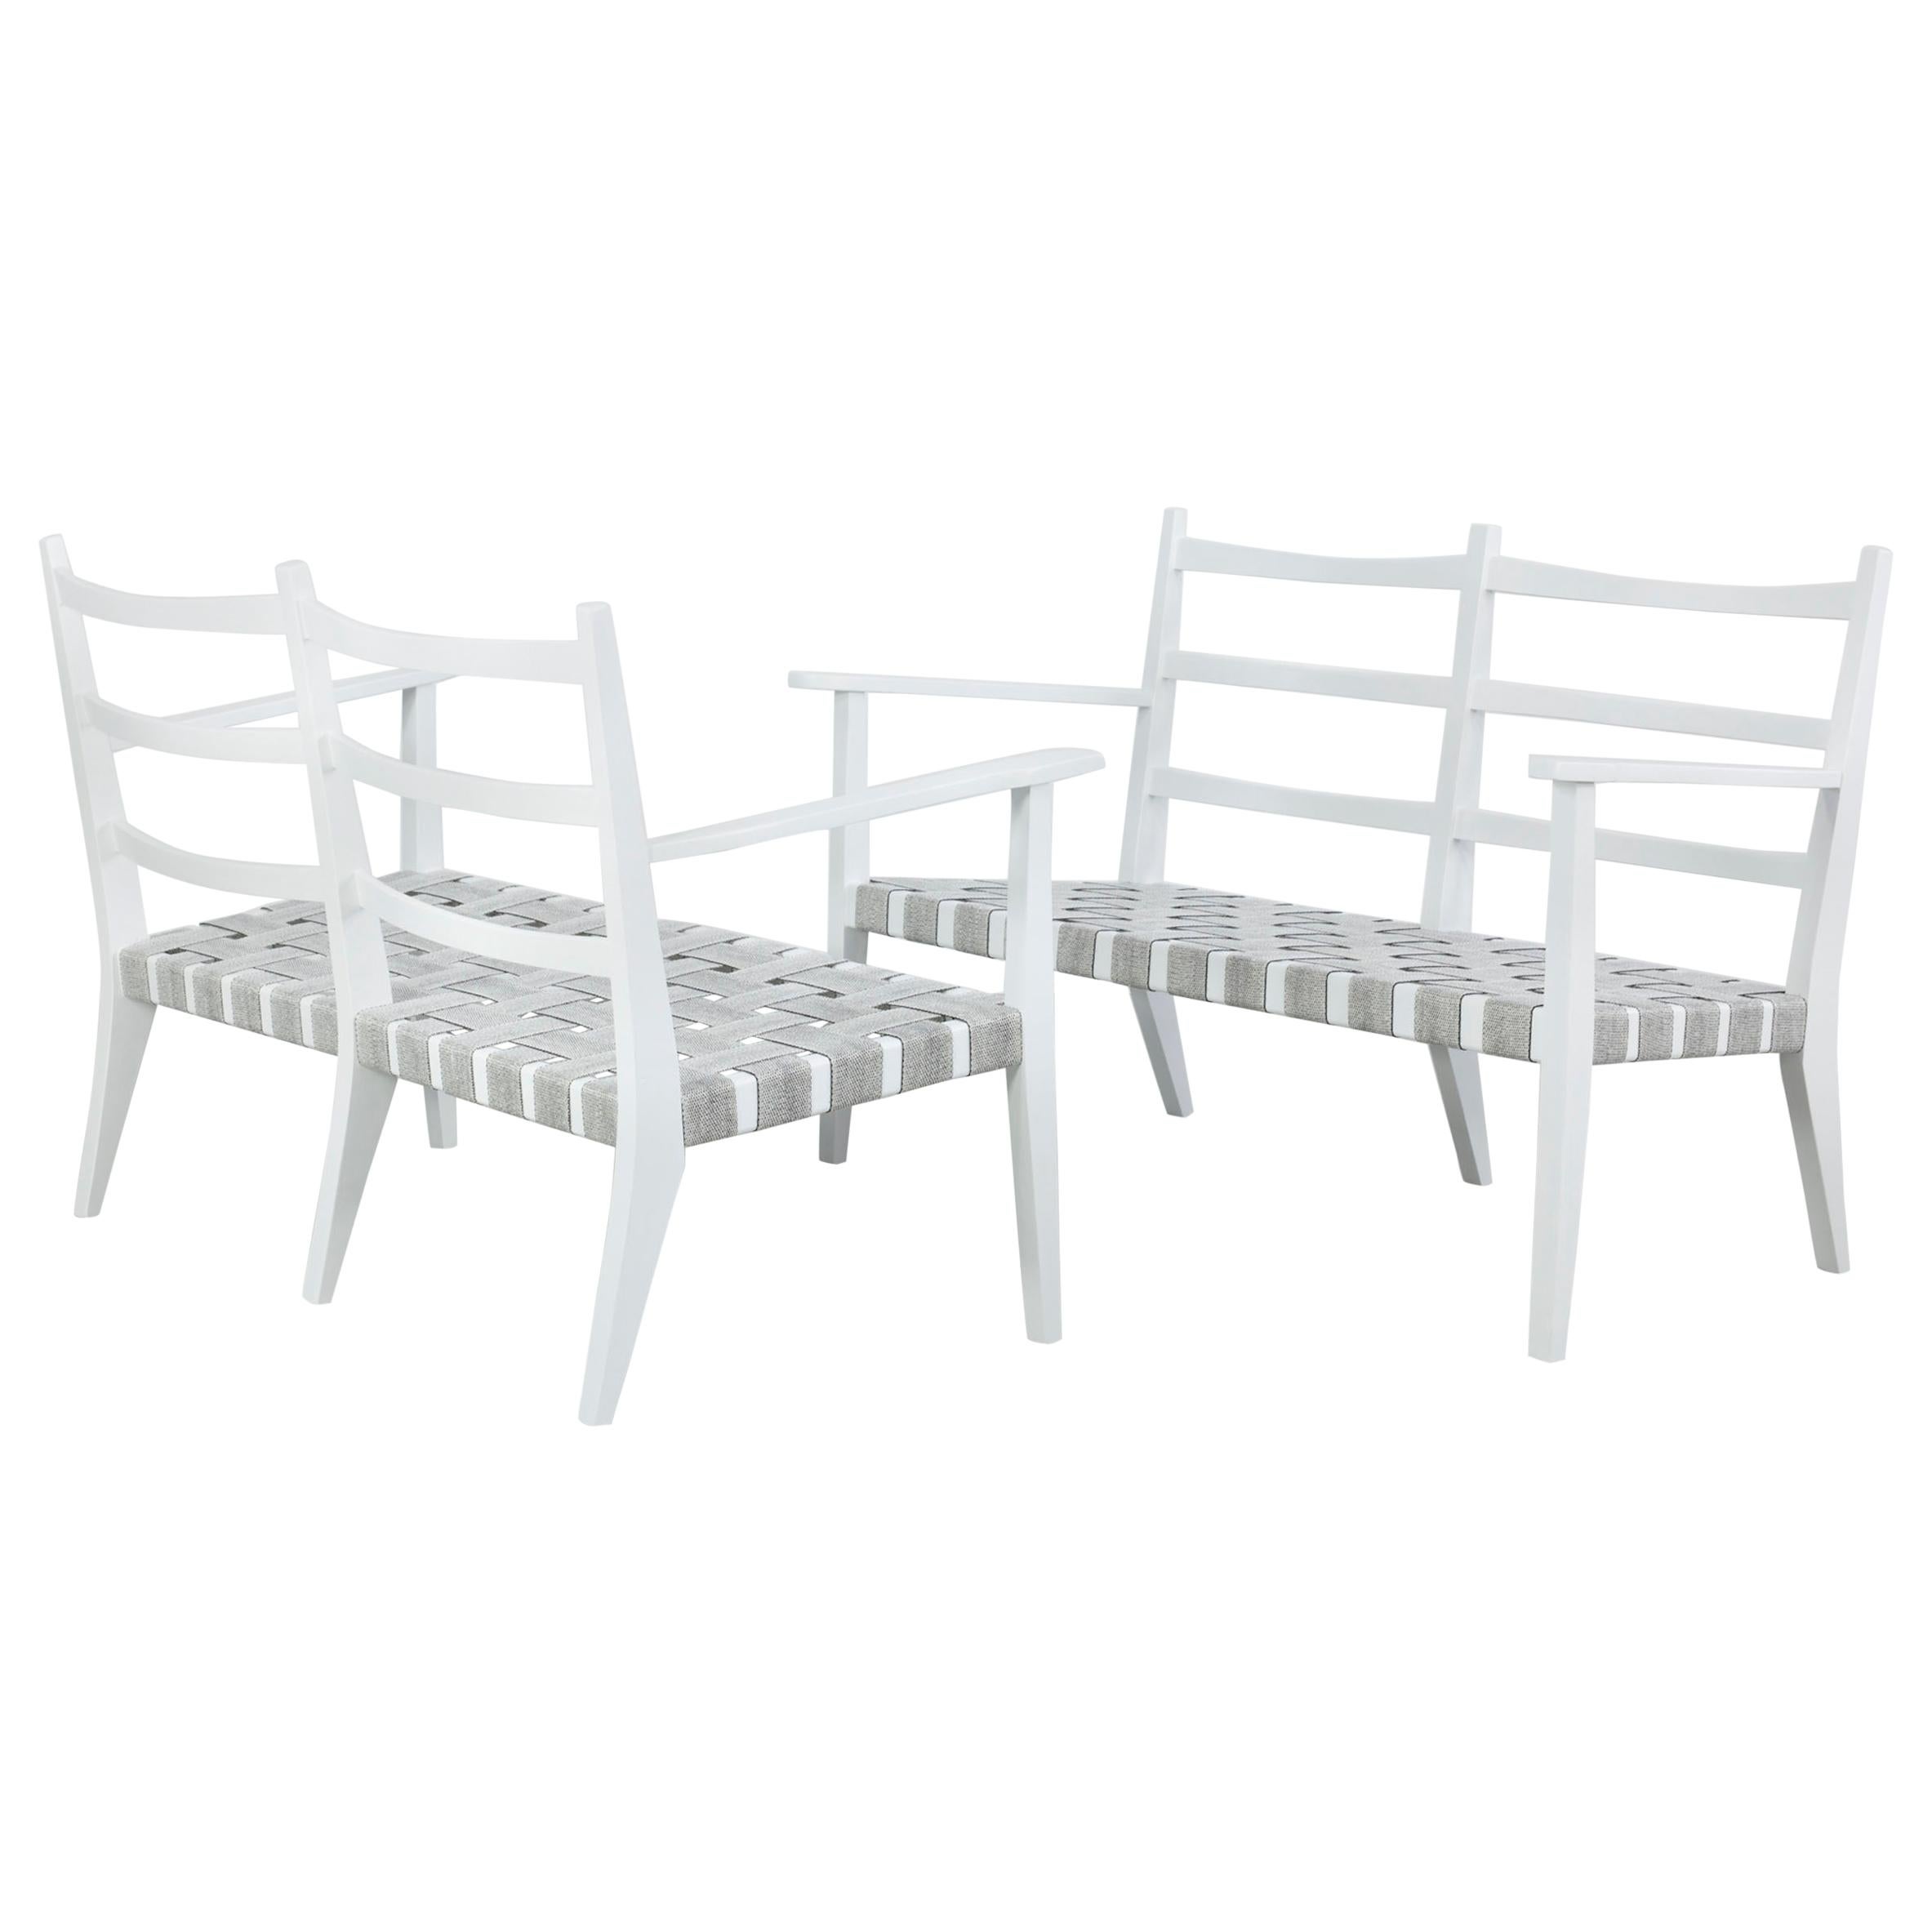 Set of 3 White Painted Wooden Benches with 1 Armchair, Italy, 1960s For Sale